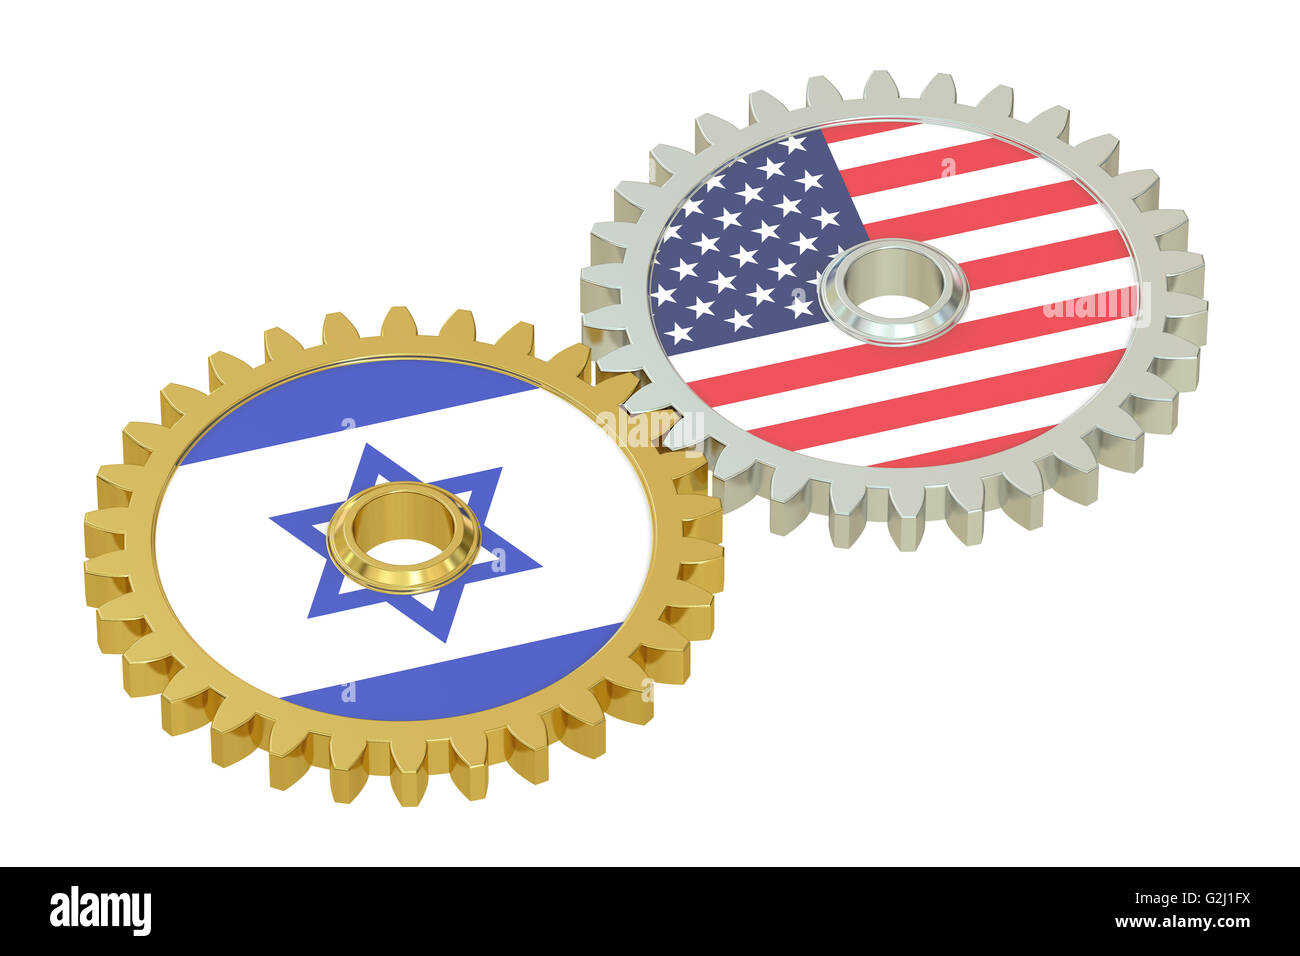 Israel and United States relations concept, flags on a gears. 3D rendering isolated on white background Stock Photo